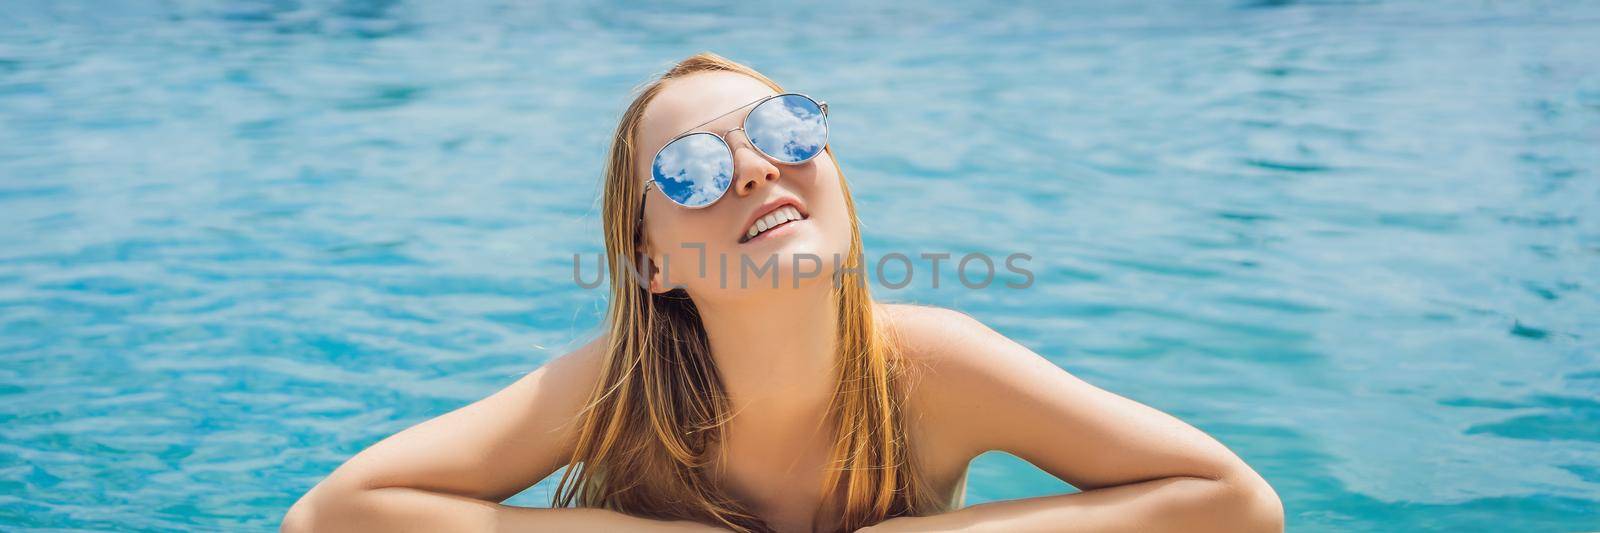 Young woman in outdoor swimming pool with city view in blue sky. BANNER, LONG FORMAT